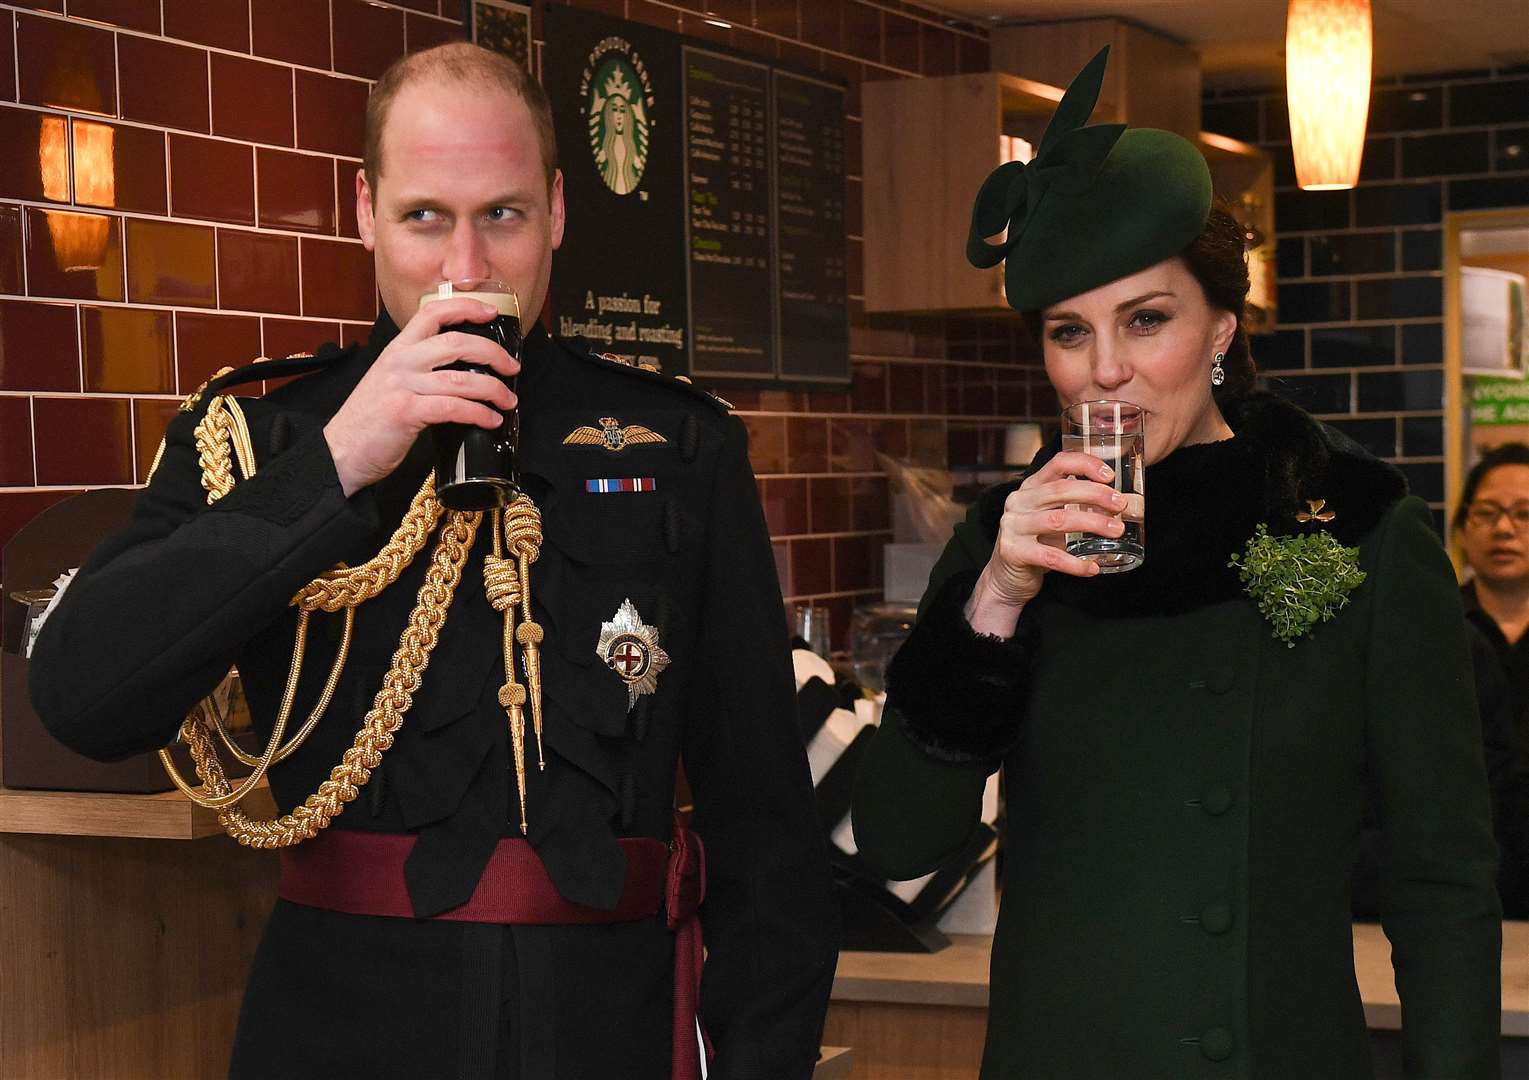 William and Kate attend the St Patrick’s Day parade at Cavalry Barracks in Hounslow (Andrew Parsons/Sunday Times/PA)